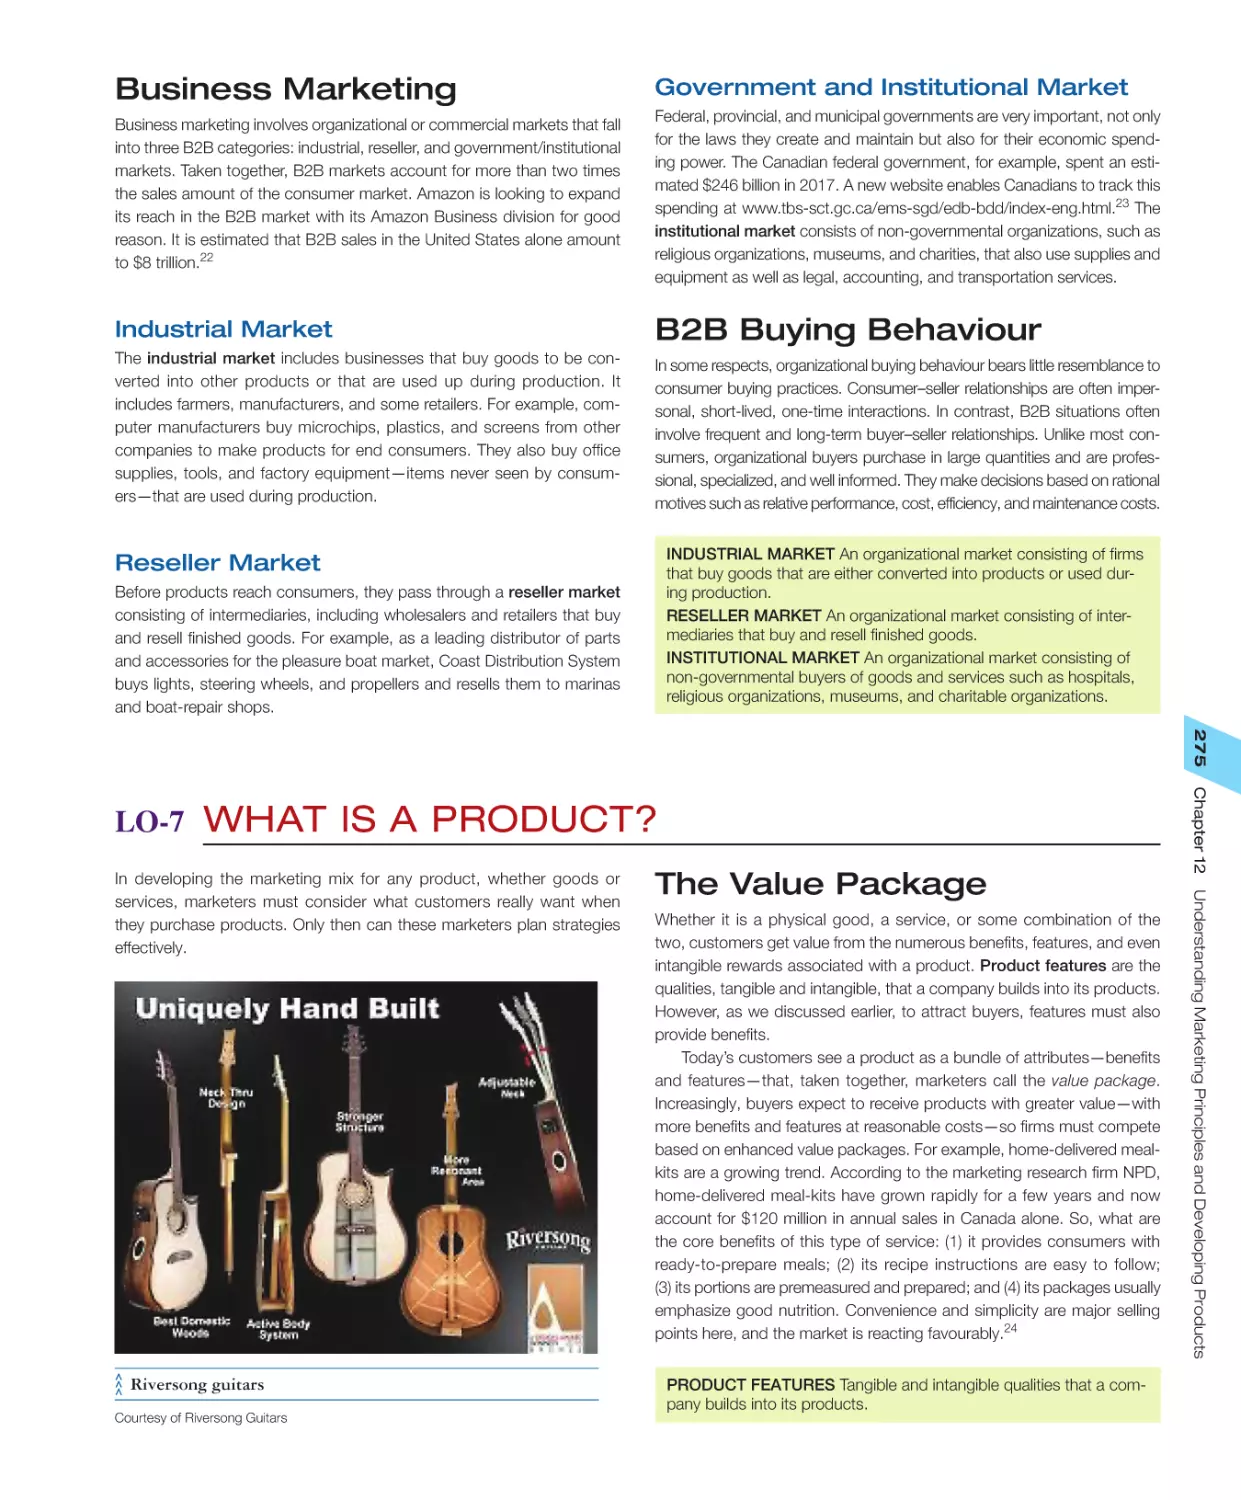 B2B Buying Behaviour
LO‐7 What Is a Product?